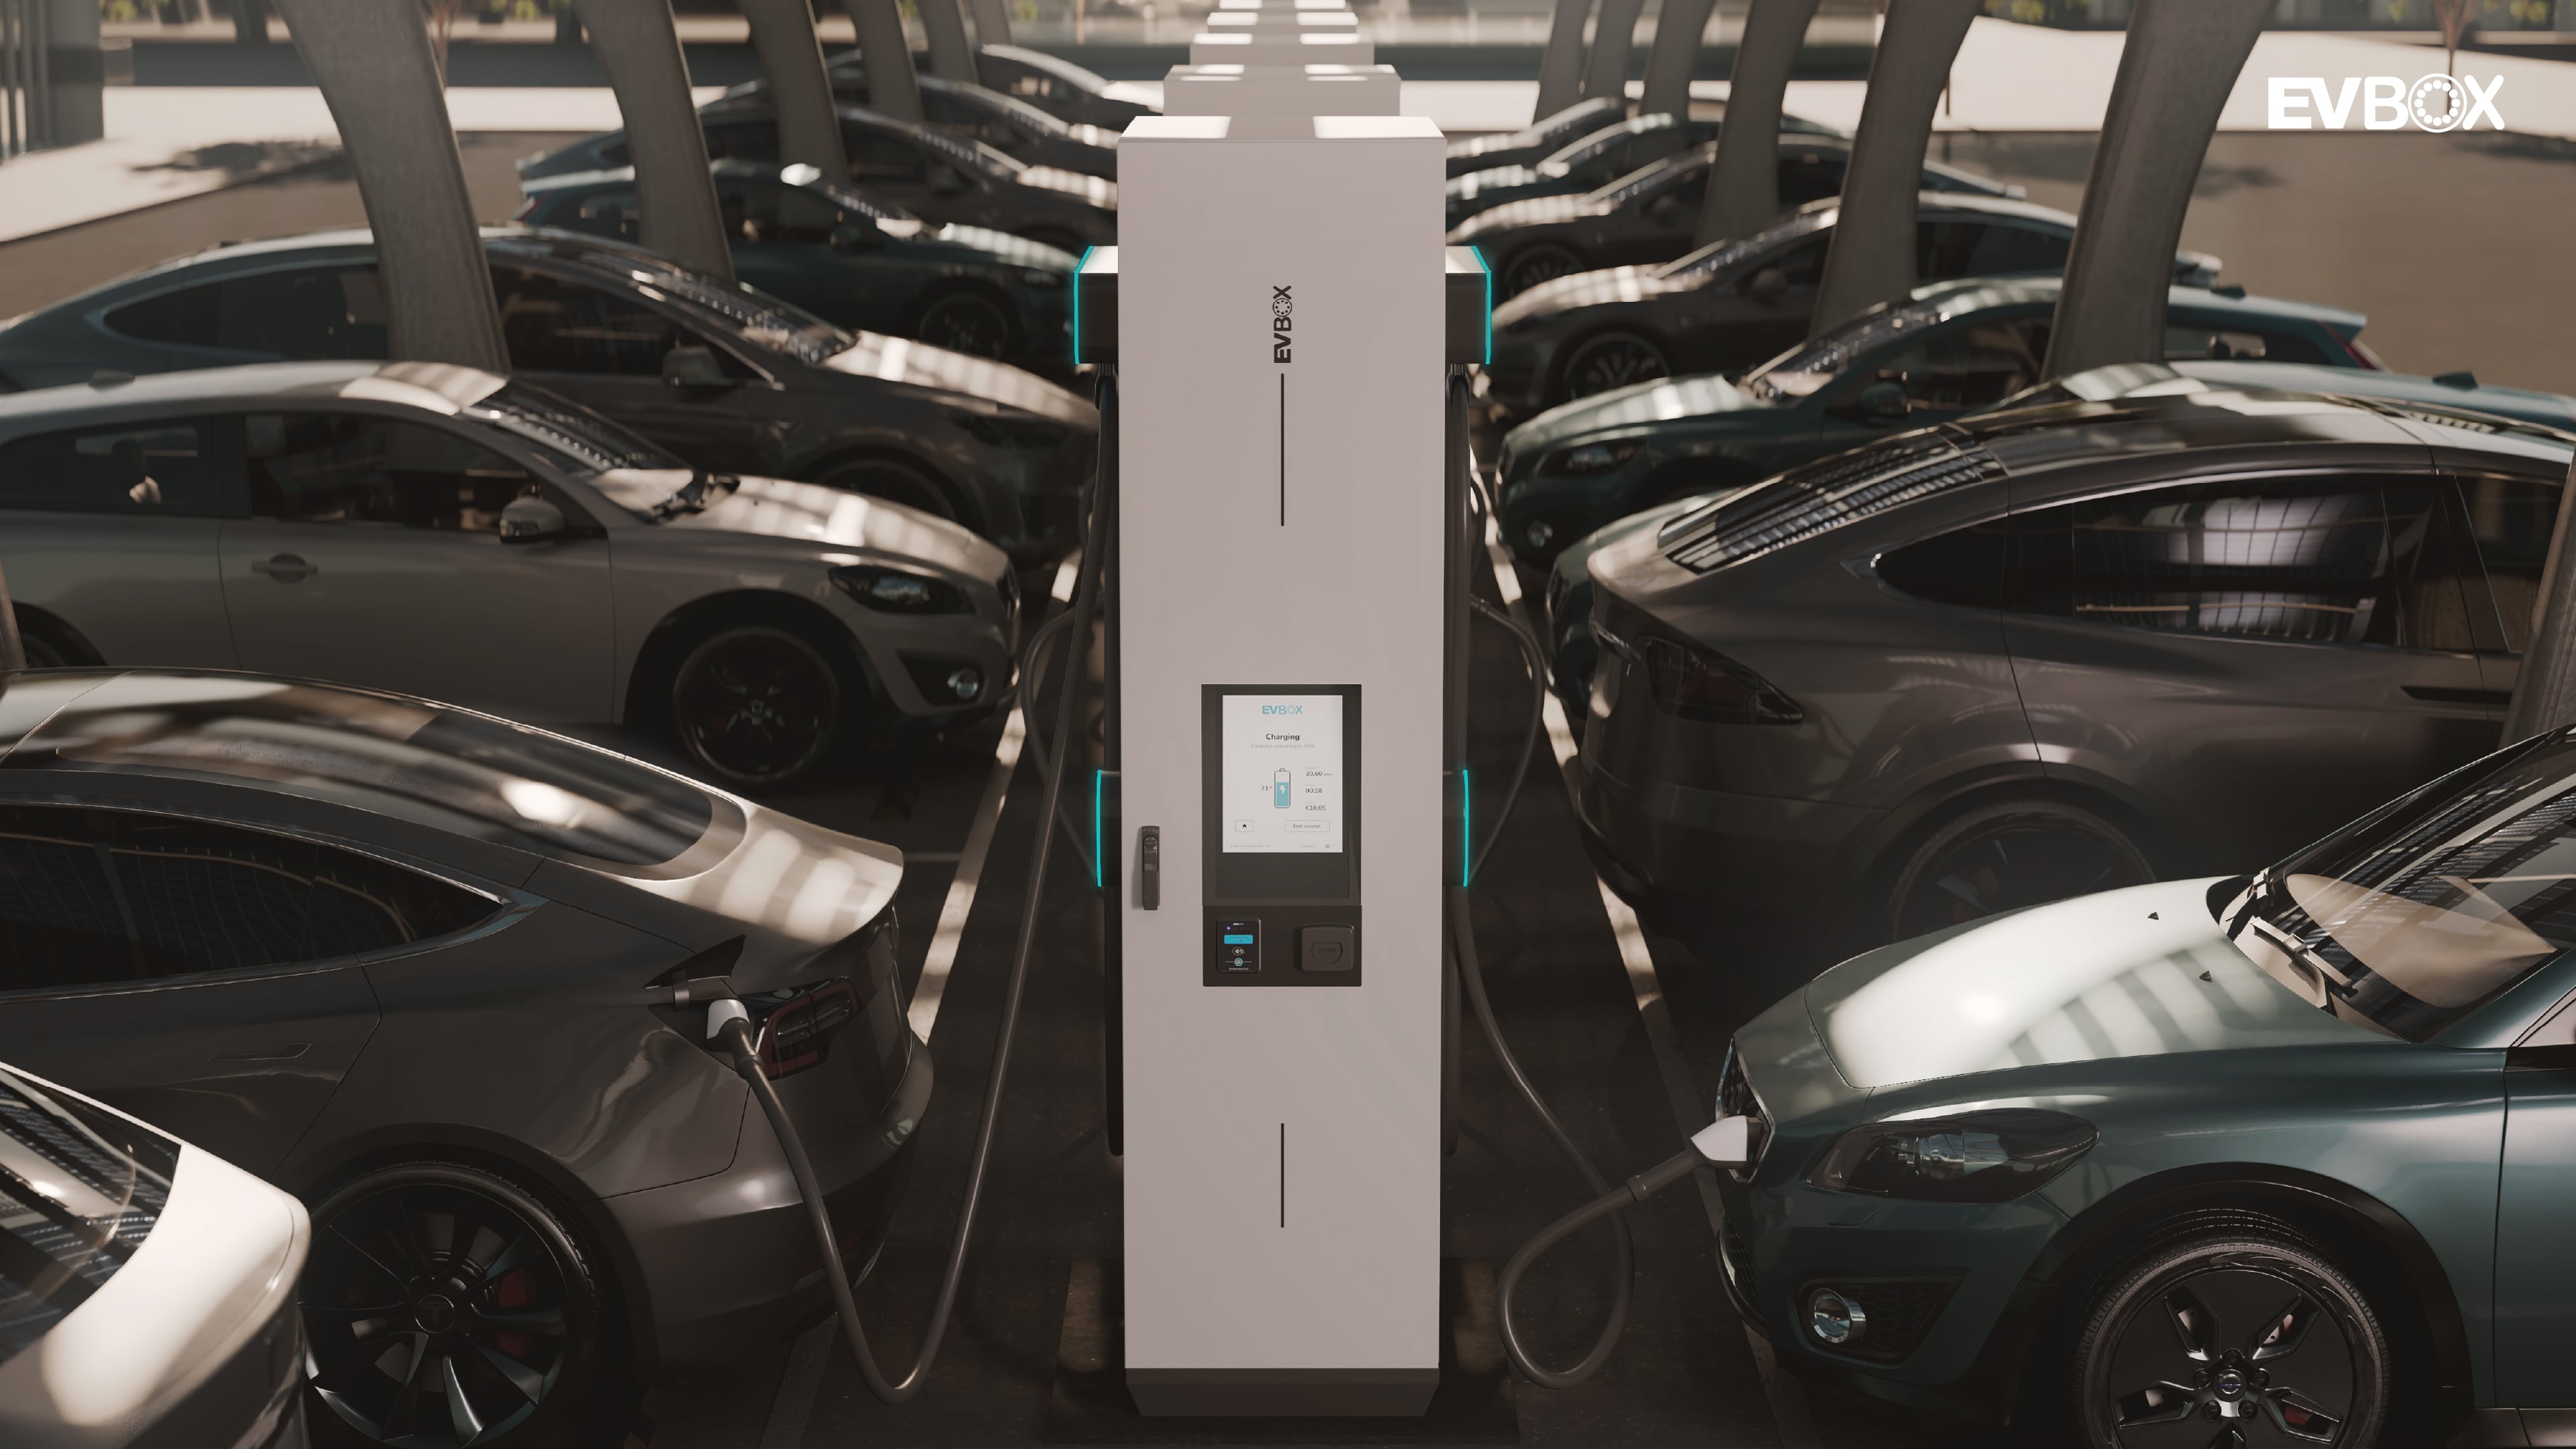 A car park with multiple DC fast charging stations centered in the middle of two rows filled with electric vehicles.